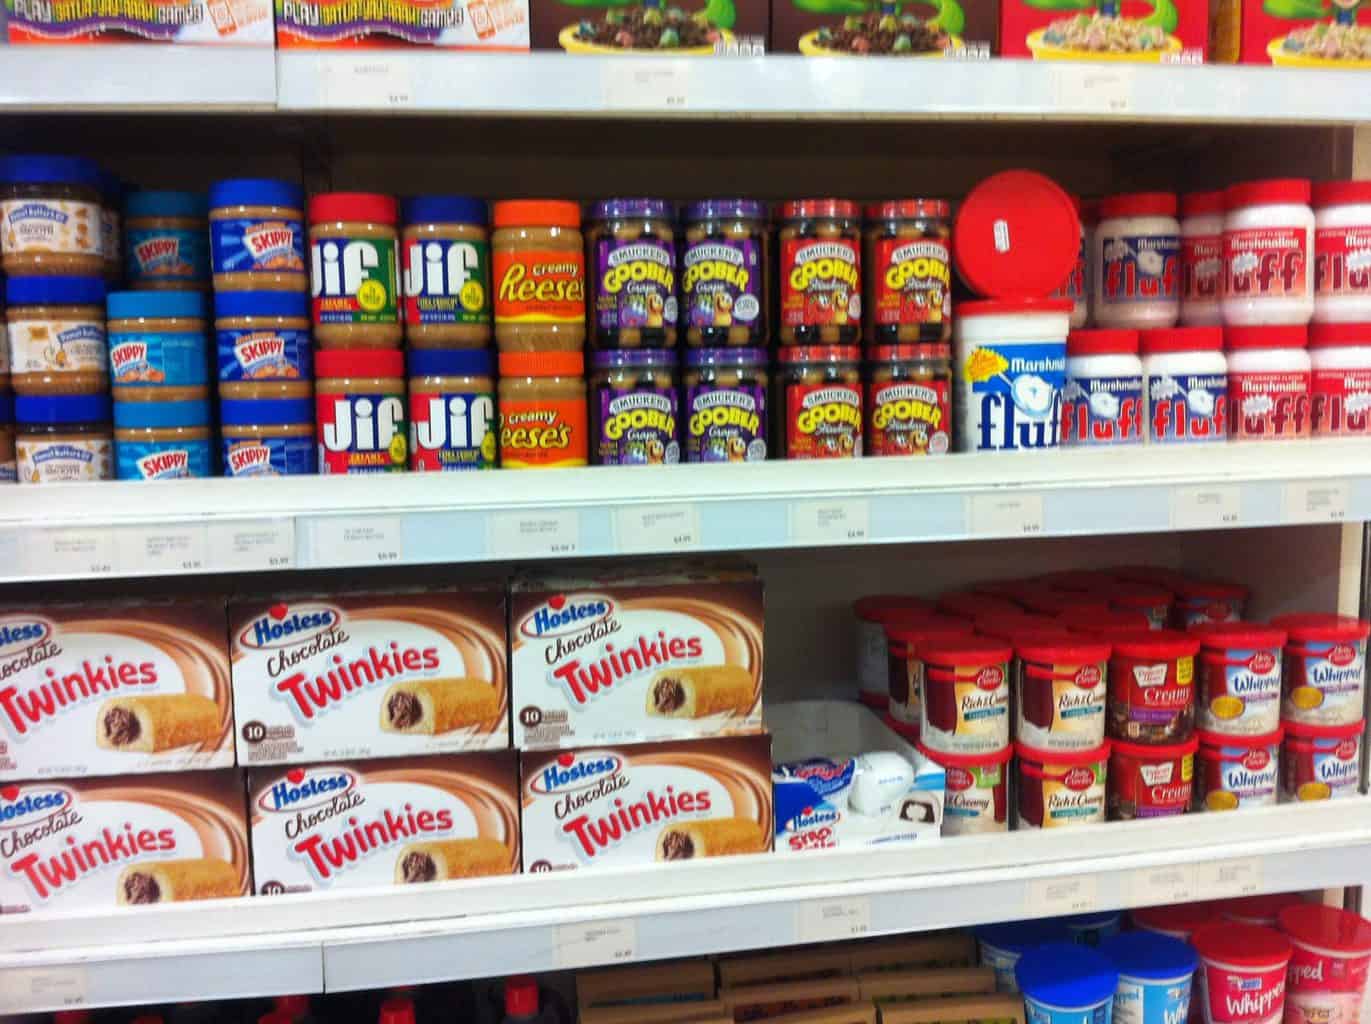 Store shelves with American food items on it such as Jif peanut butter Twinkies and Marshmallow Fluff